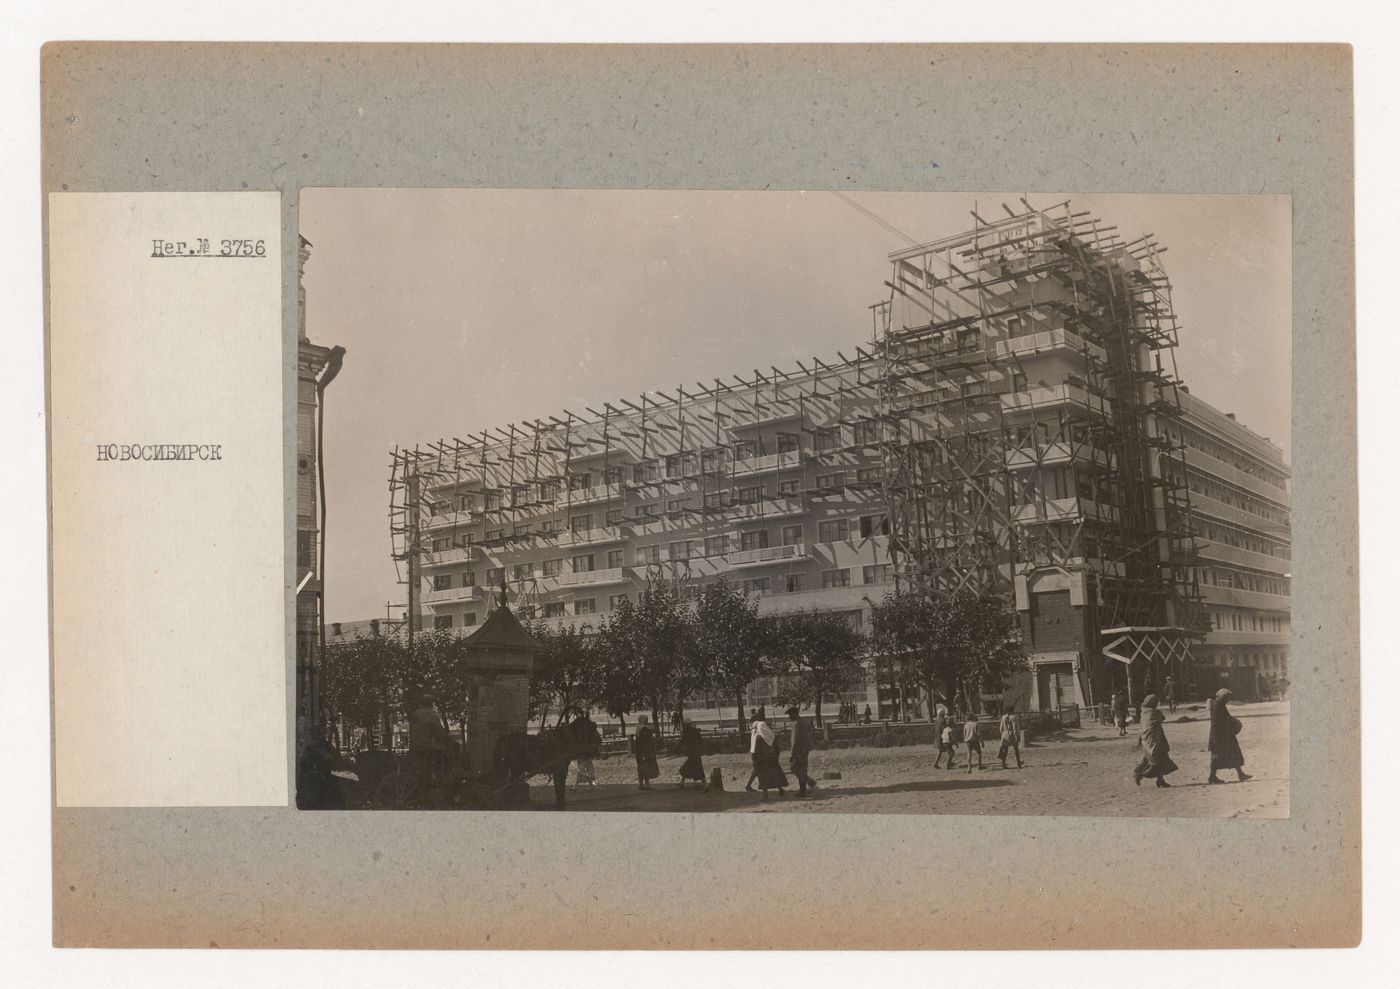 View of the principal façade of the "House with a Clock" under construction, Novosibirsk, Soviet Union (now in Russia)